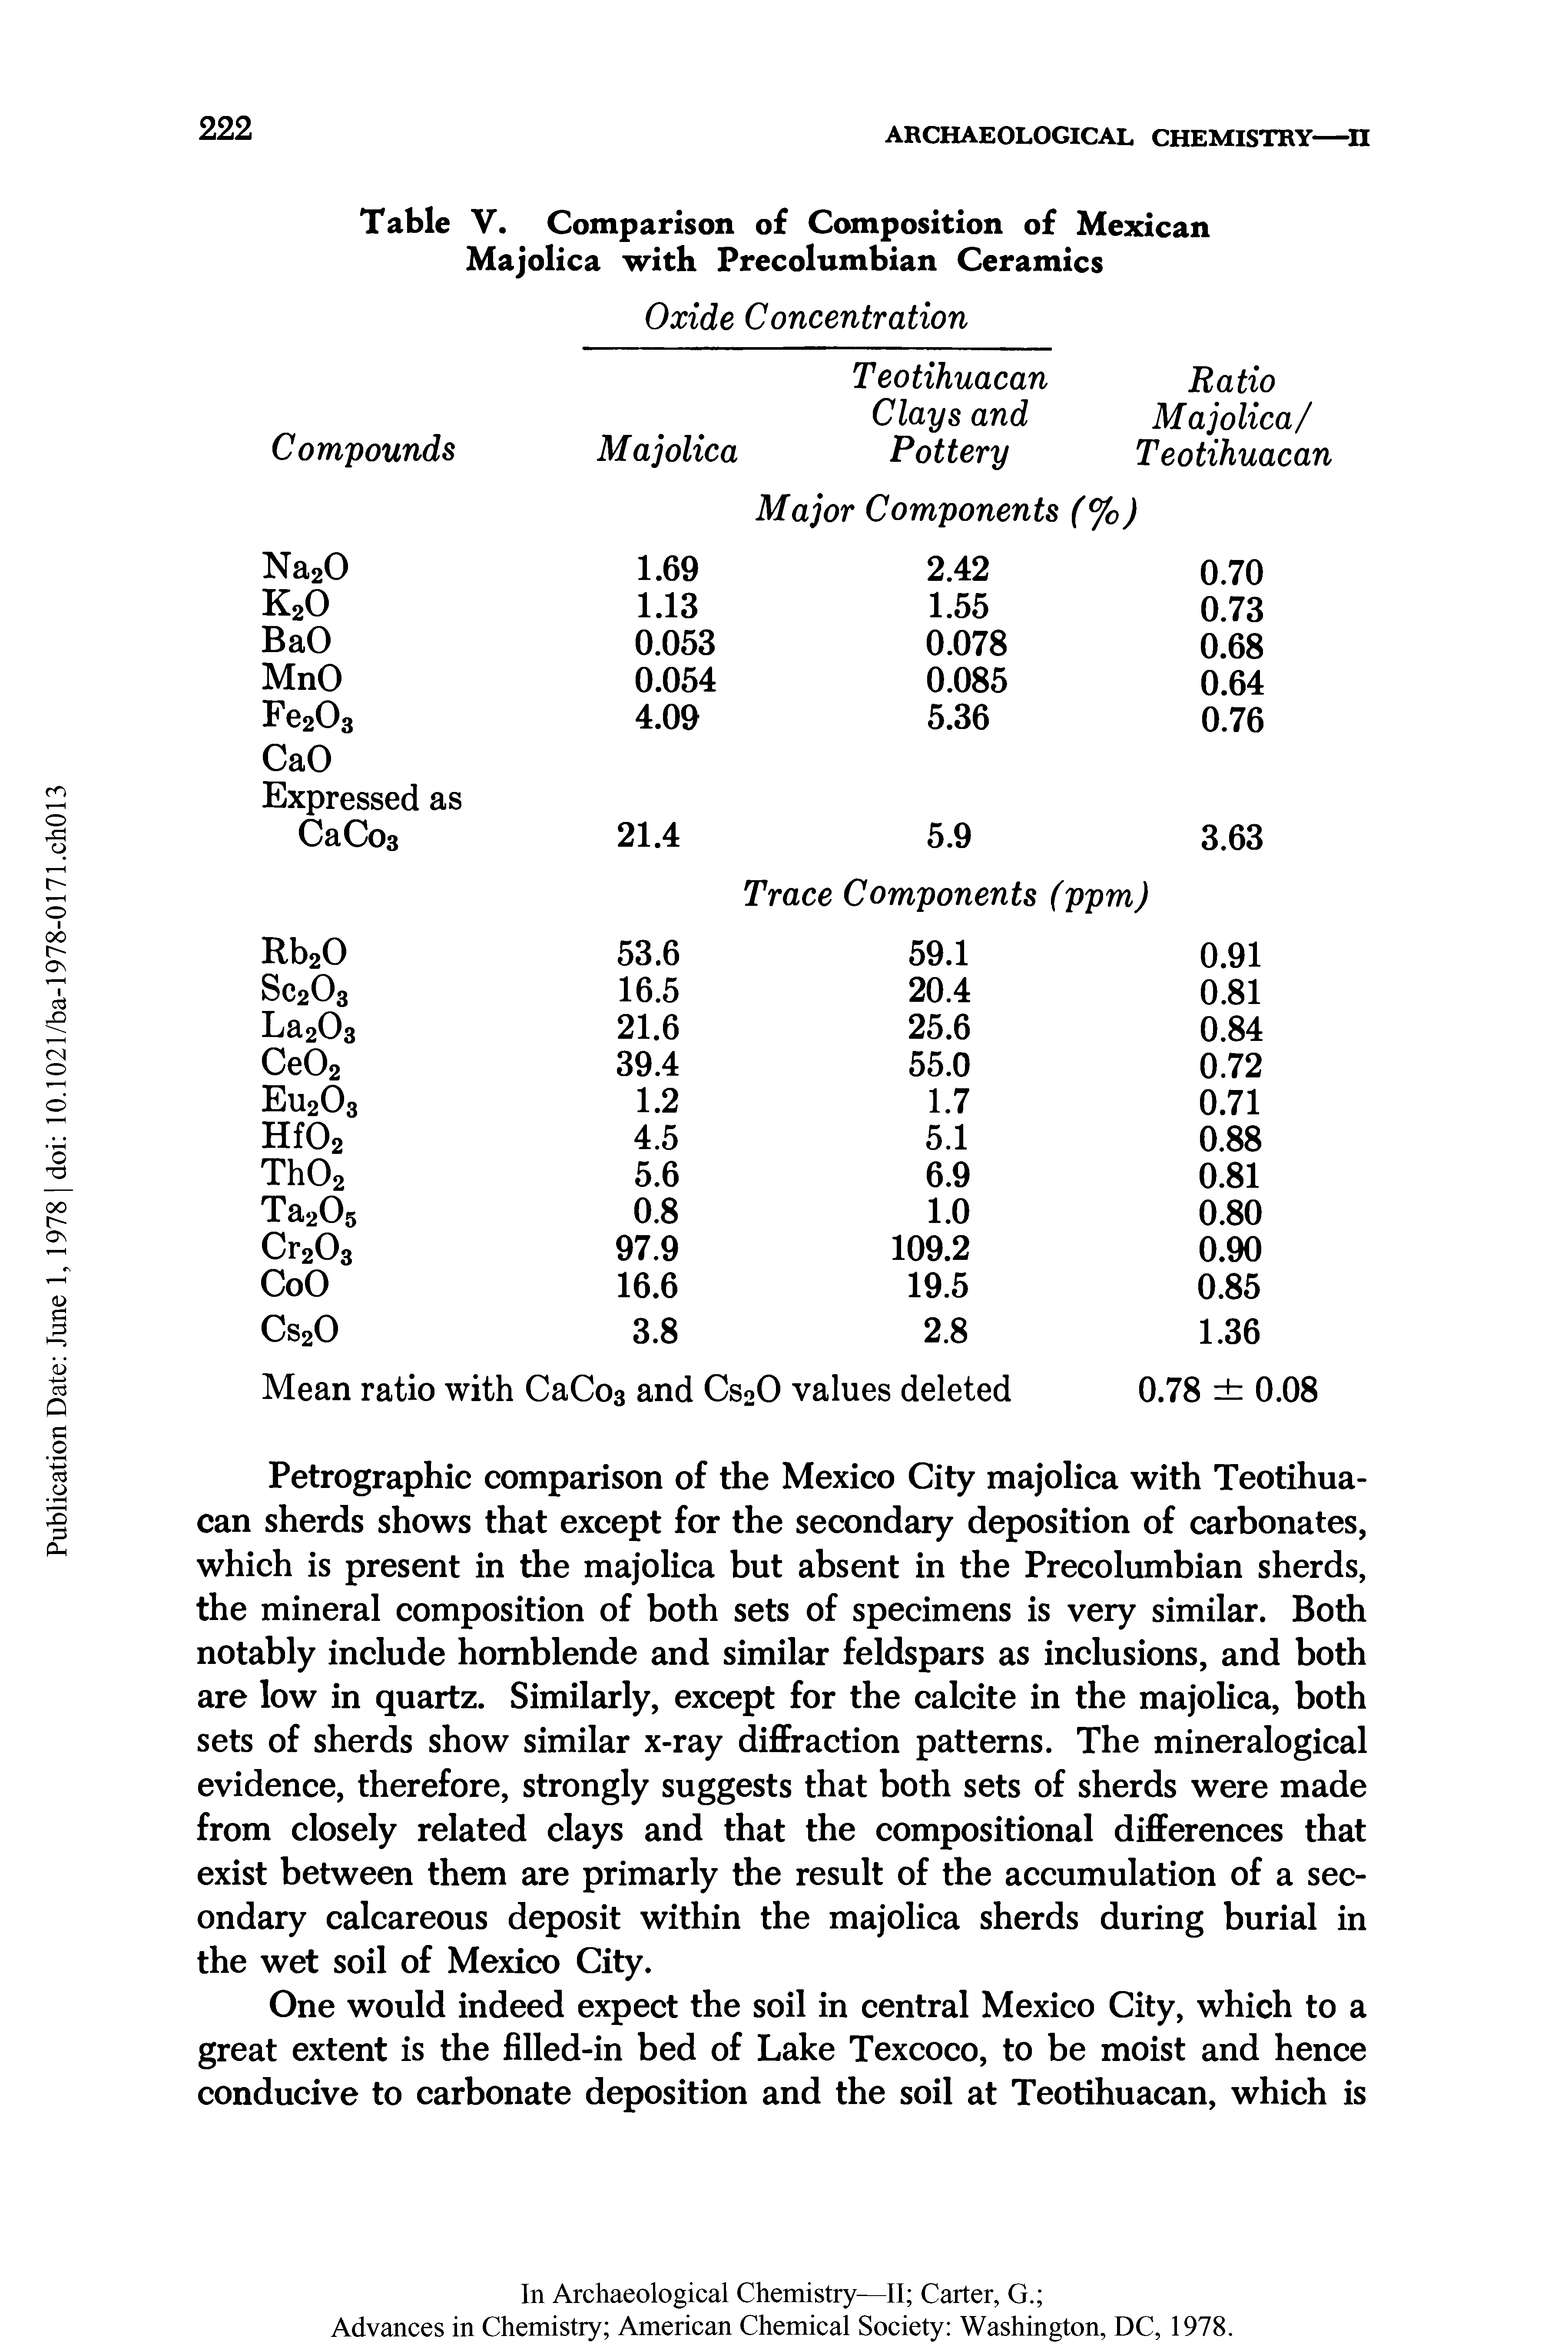 Table V. Comparison of Composition of Mexican Majolica with Precolumbian Ceramics...